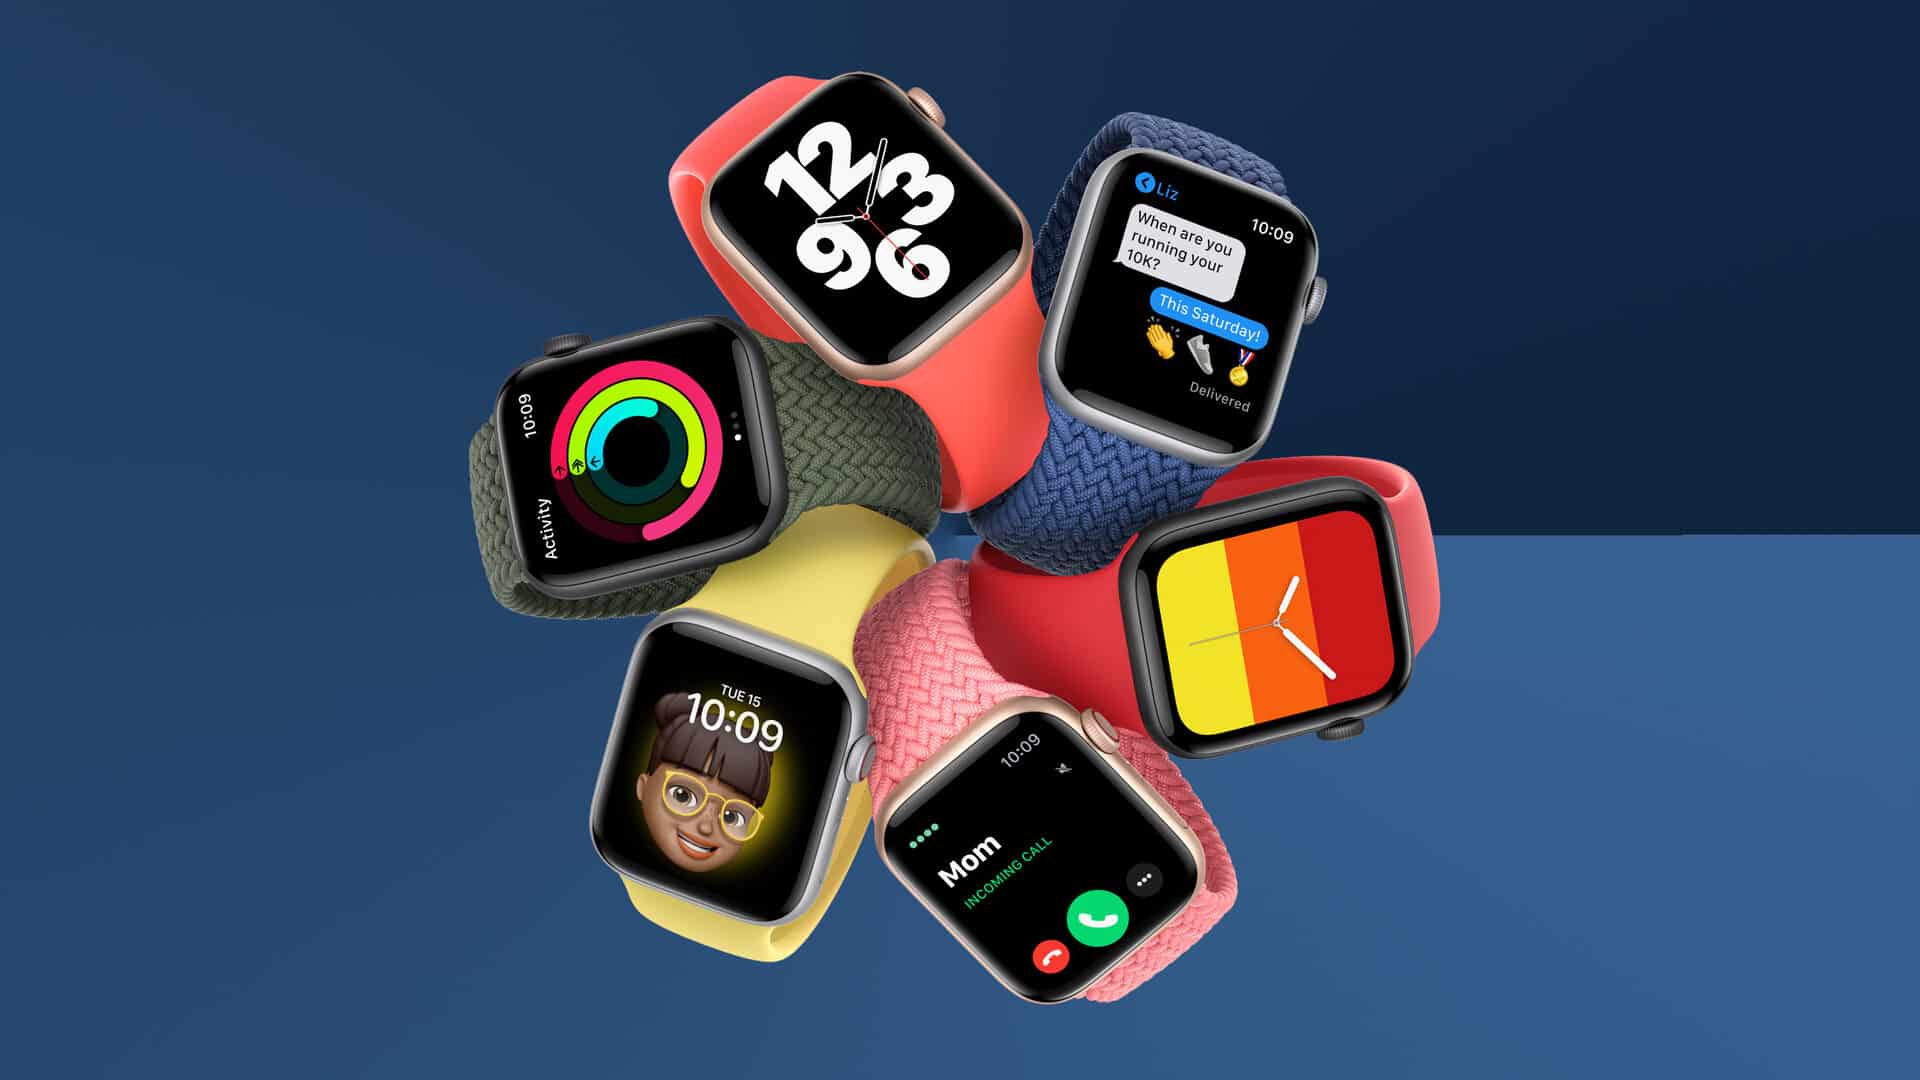 Apple Watch 7 Series features larger, refined design and indispensable tools for health and wellness